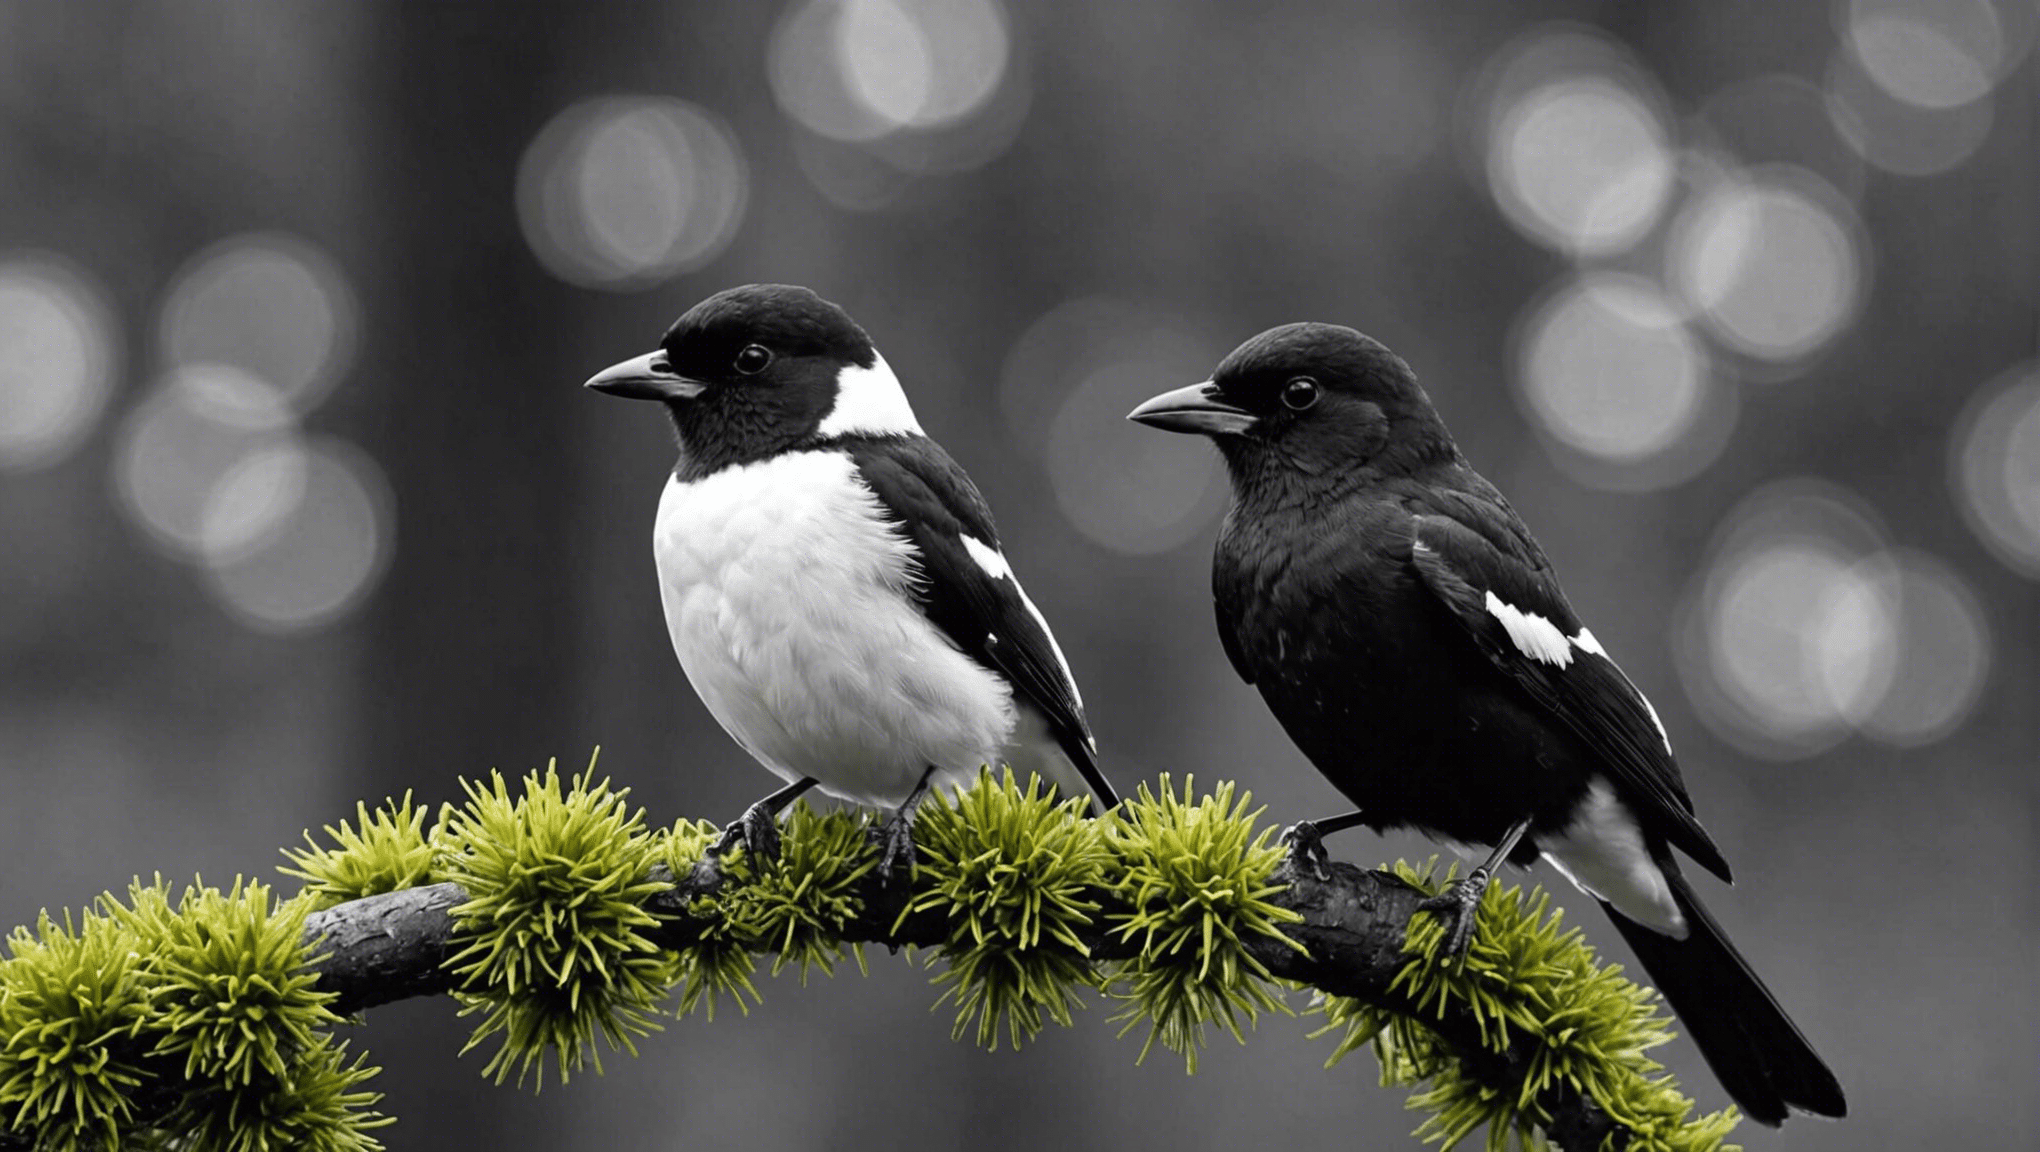 discover the allure of black and white birds and their striking contrast in nature.